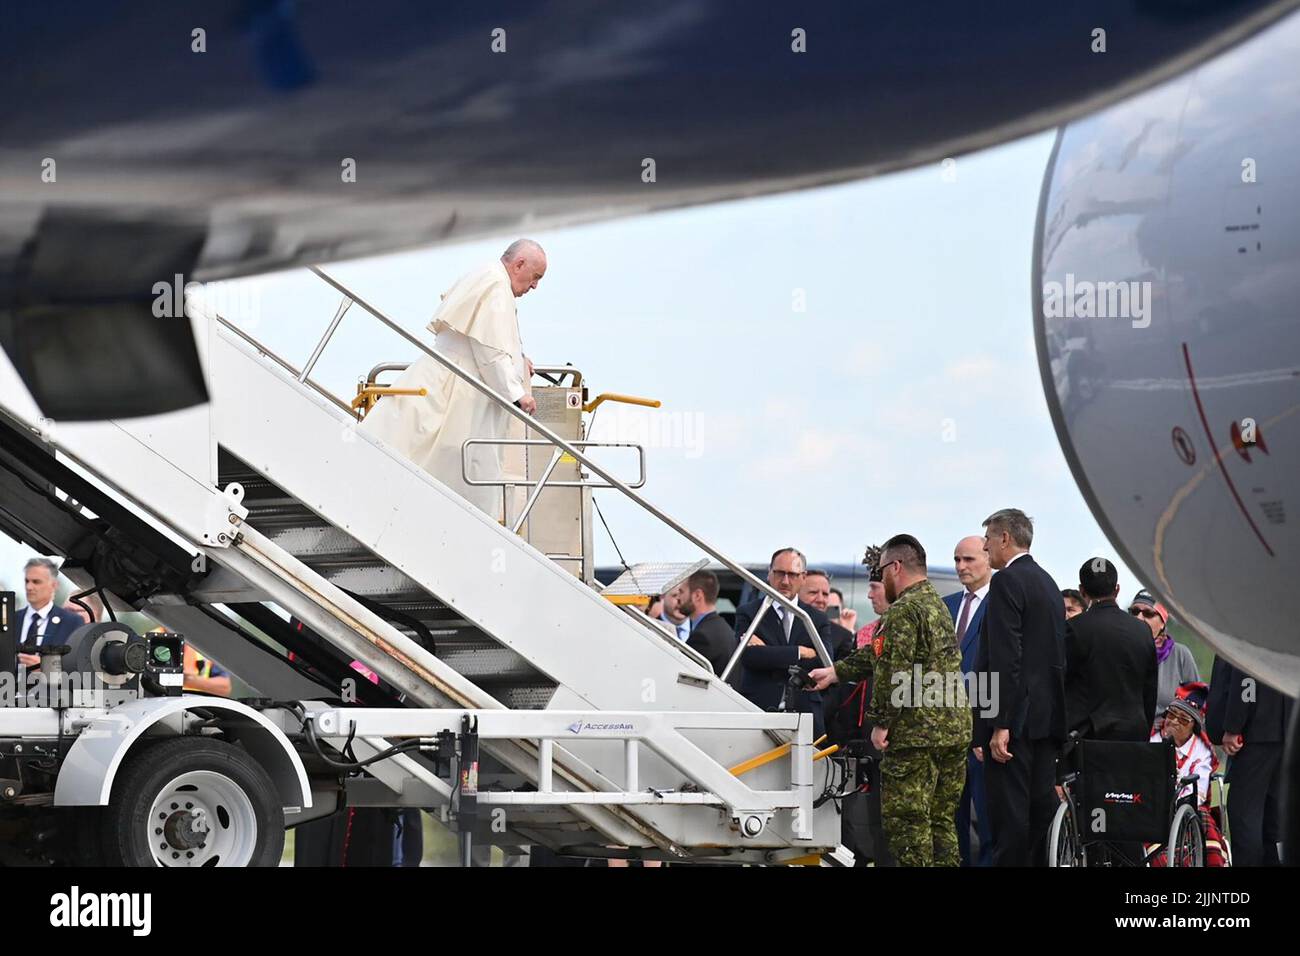 Quebec, Canada. 26th July, 2022. Pope Francis stands on a hoist during his arrival by plane at the Québec airport. As part of his six-day trip to Canada, Pope Francis plans to celebrate Mass at the National Shrine and meet church officials in Quebec City this Thursday. Credit: Johannes Neudecker/dpa/Alamy Live News Stock Photo